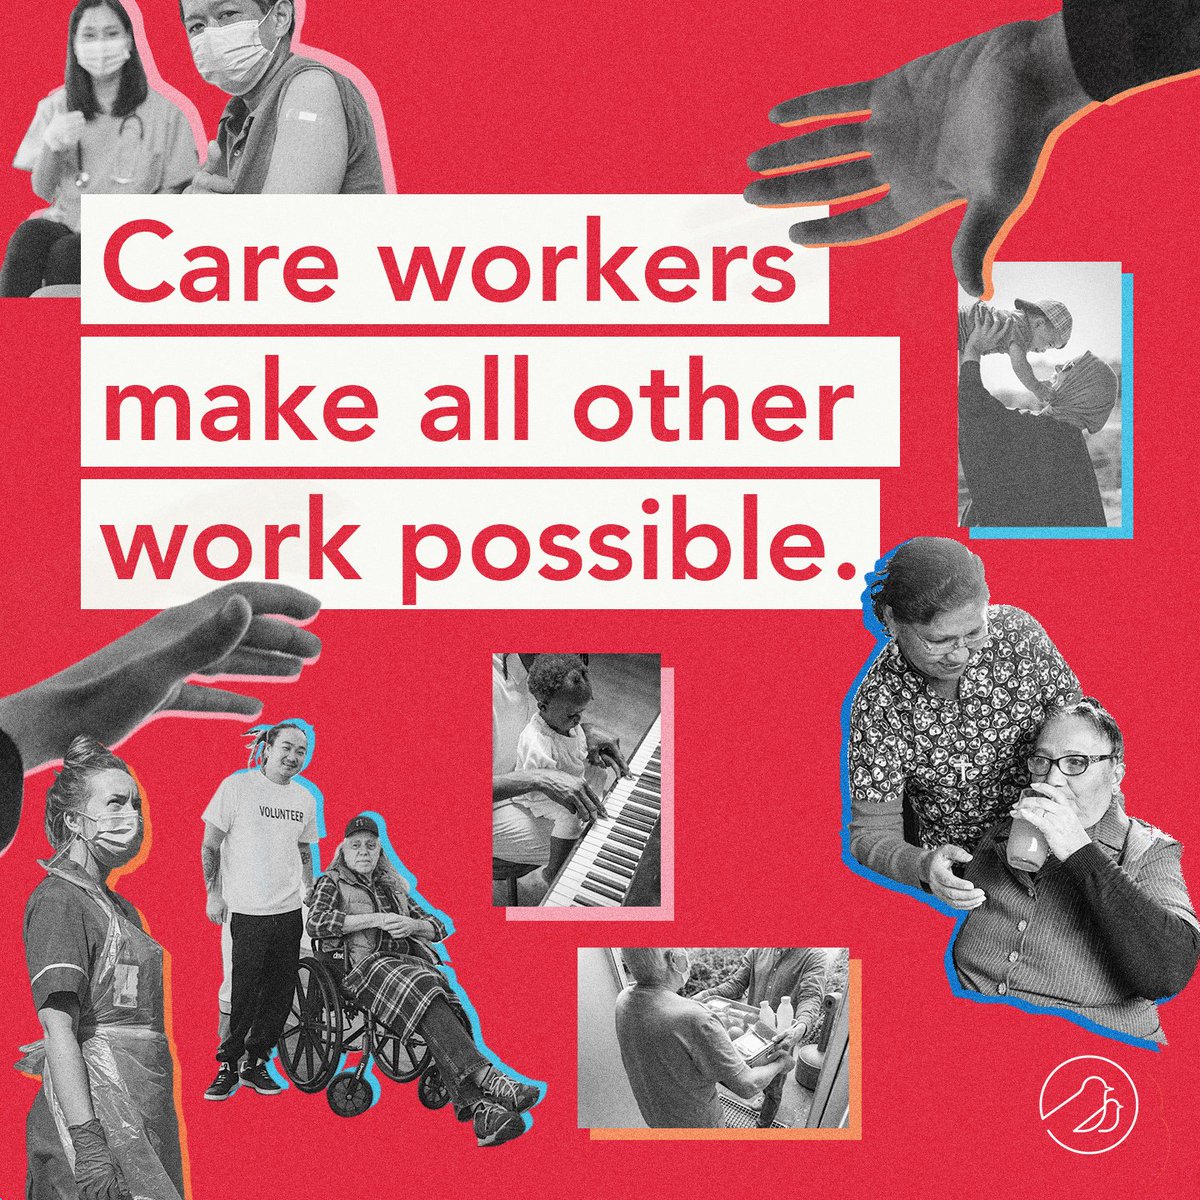 We all depend on care. But without care workers, we can't access it. We need to invest in care work and support care workers with good pay and benefits! This #InternationalWorkersDay, we're sending a big thank you to care workers, whose work makes all other work possible.